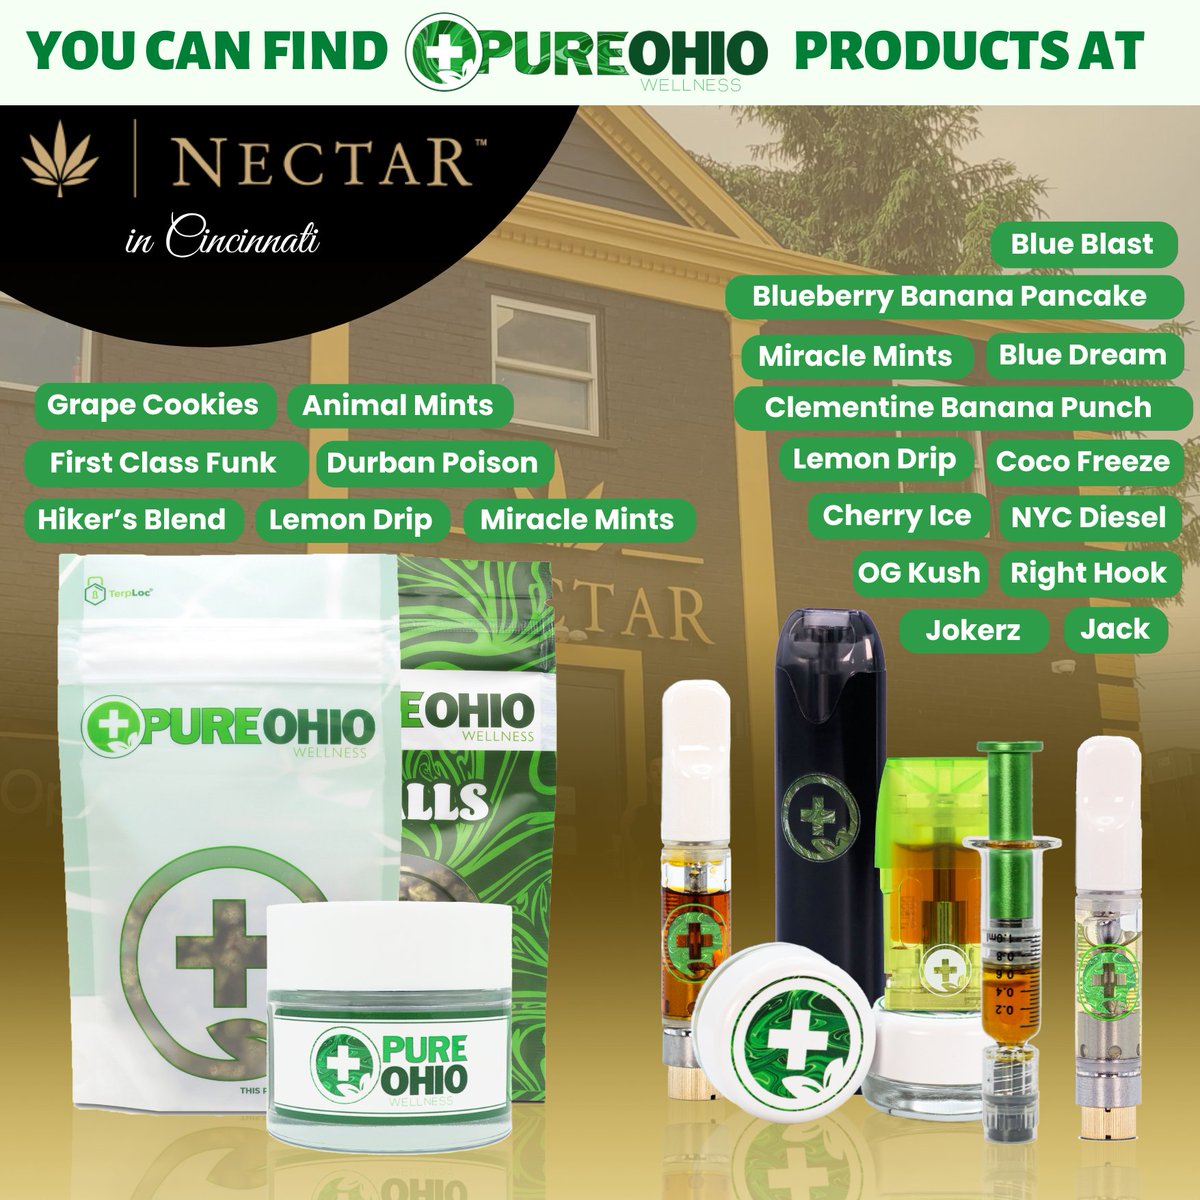 Are you in the Cincinnati area? 
Head to the Nectar dispensary to pick up some of your favorite Pure Ohio Wellness products there this weekend! 

 #pureohiowellness #columbus #dayton #ohio #ohiomade